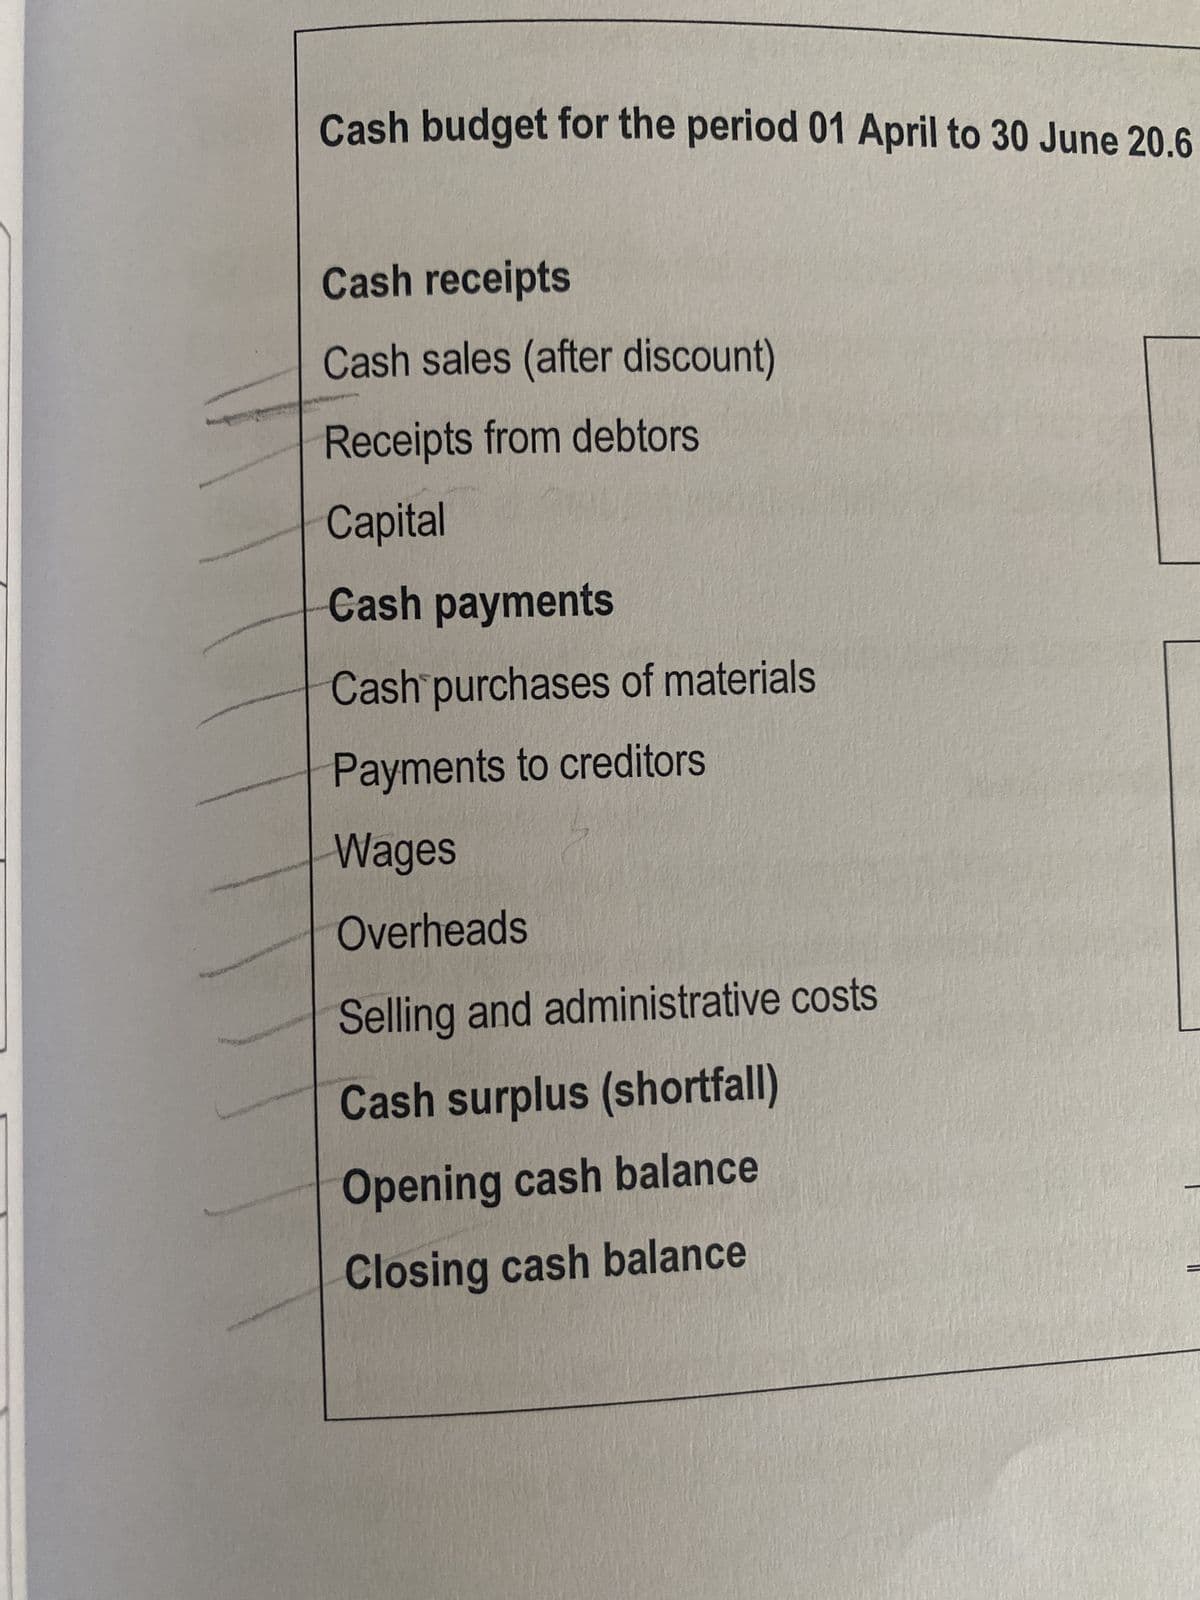 Cash budget for the period 01 April to 30 June 20.6
Cash receipts
Cash sales (after discount)
Receipts from debtors
Capital
Cash payments
Cash purchases of materials
Payments to creditors
Wages
Overheads
Selling and administrative costs
Cash surplus (shortfall)
Opening cash balance
Closing cash balance